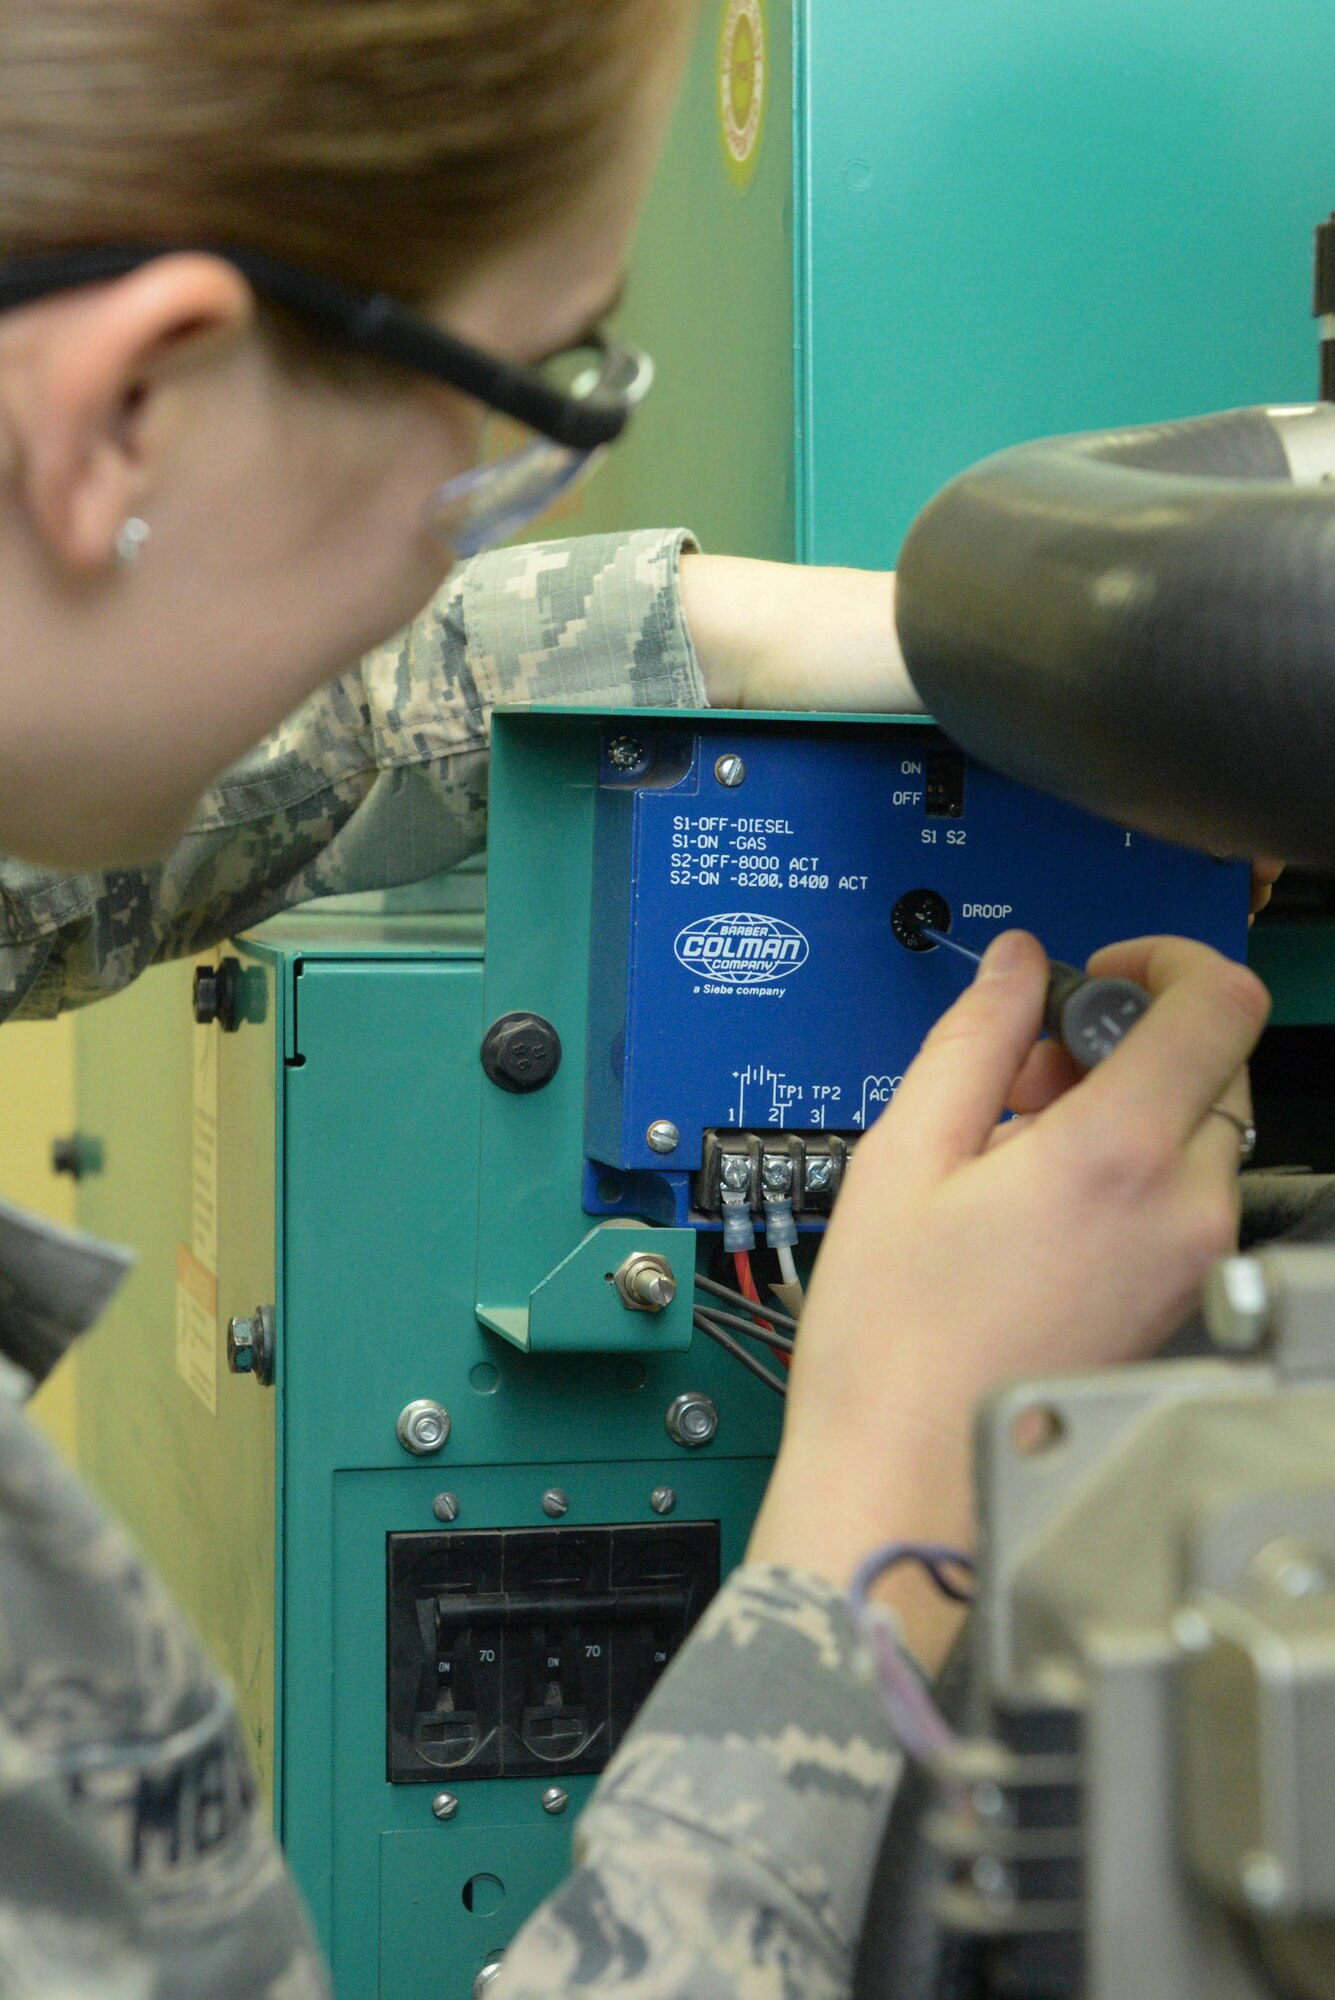 An Airman from the 5th Civil Engineer Squadron electrical power production shop adjusts the sensitivity of a generator at Minot Air Force Base, N.D., Sept. 12, 2016. Adjusting sensitivity allows the generator to run at a steady rate and react to the proper output load. (U.S. Air Force photo/Airman 1st Class Jessica Weissman)